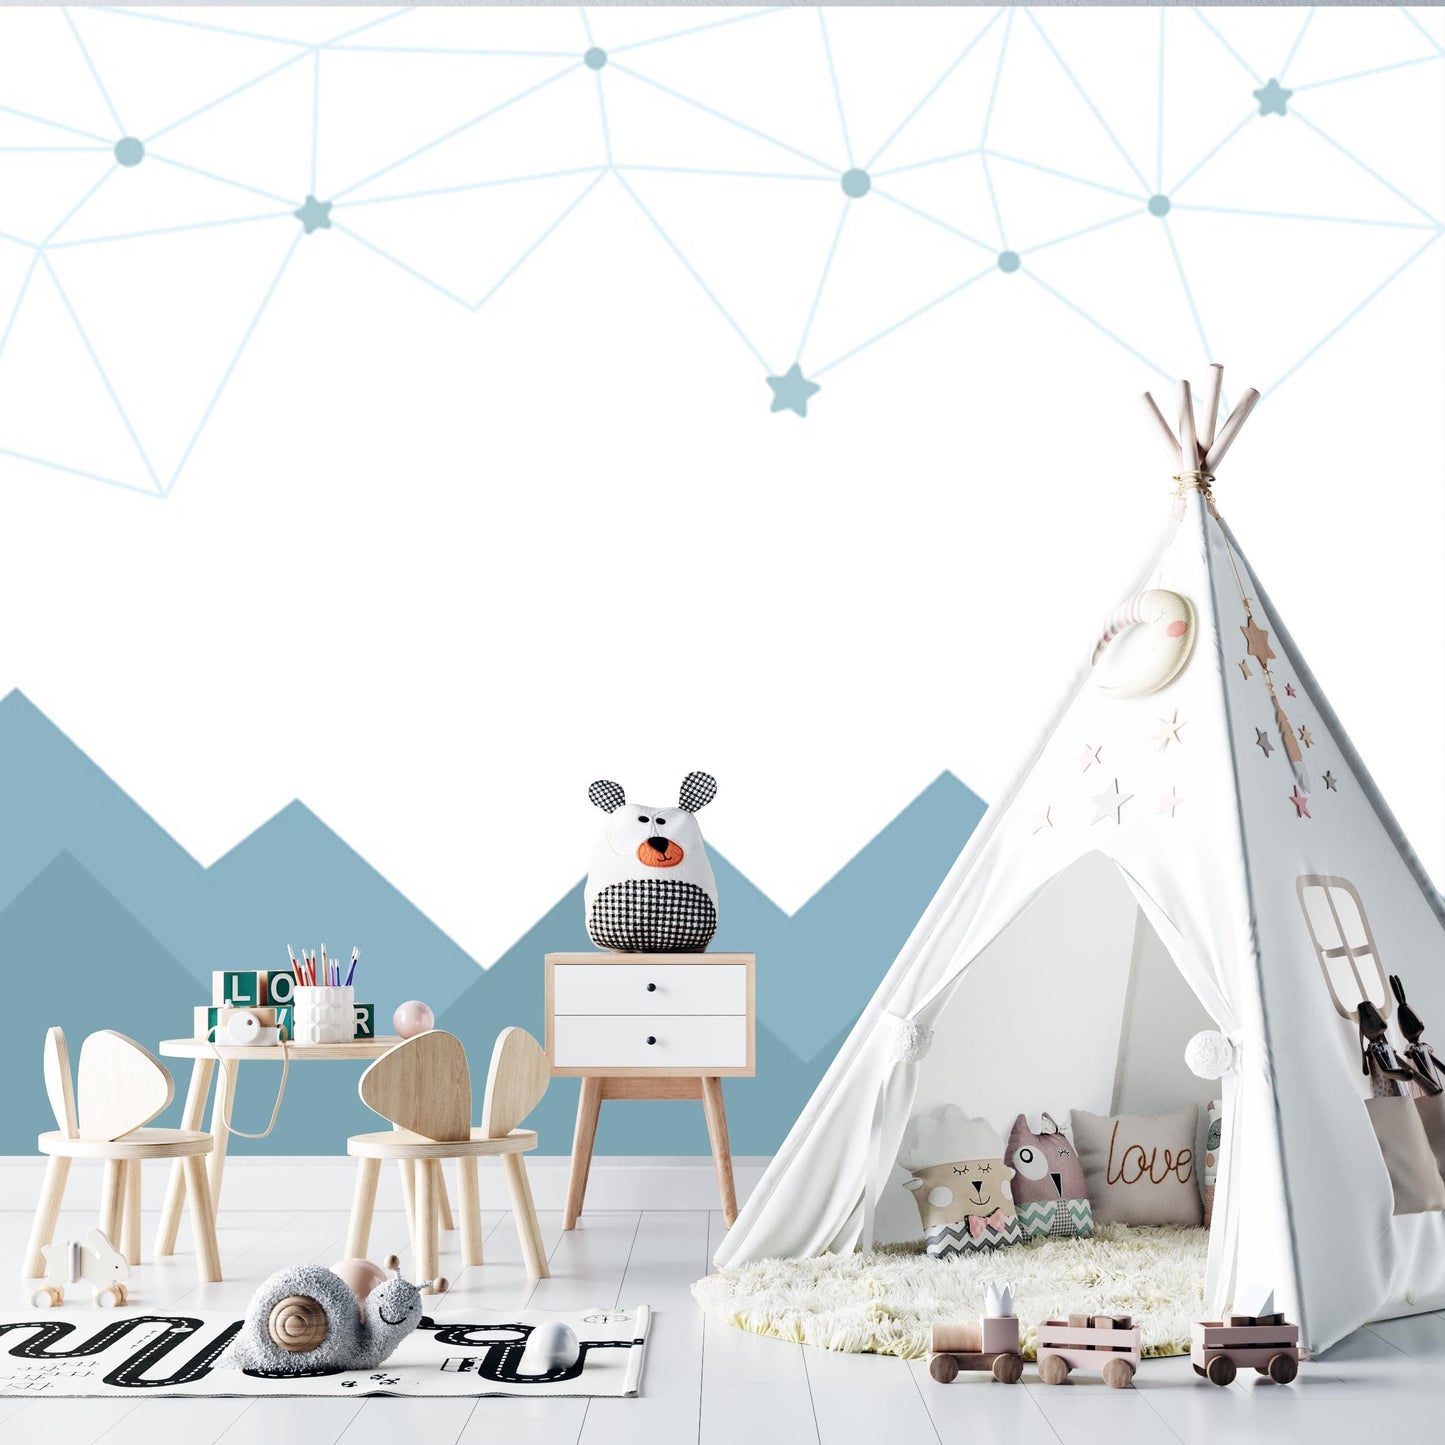 Removable Peel and Stick Wallpaper Mountains Geometric Sky Nursery Wall Paper Wall Murals, KL0041